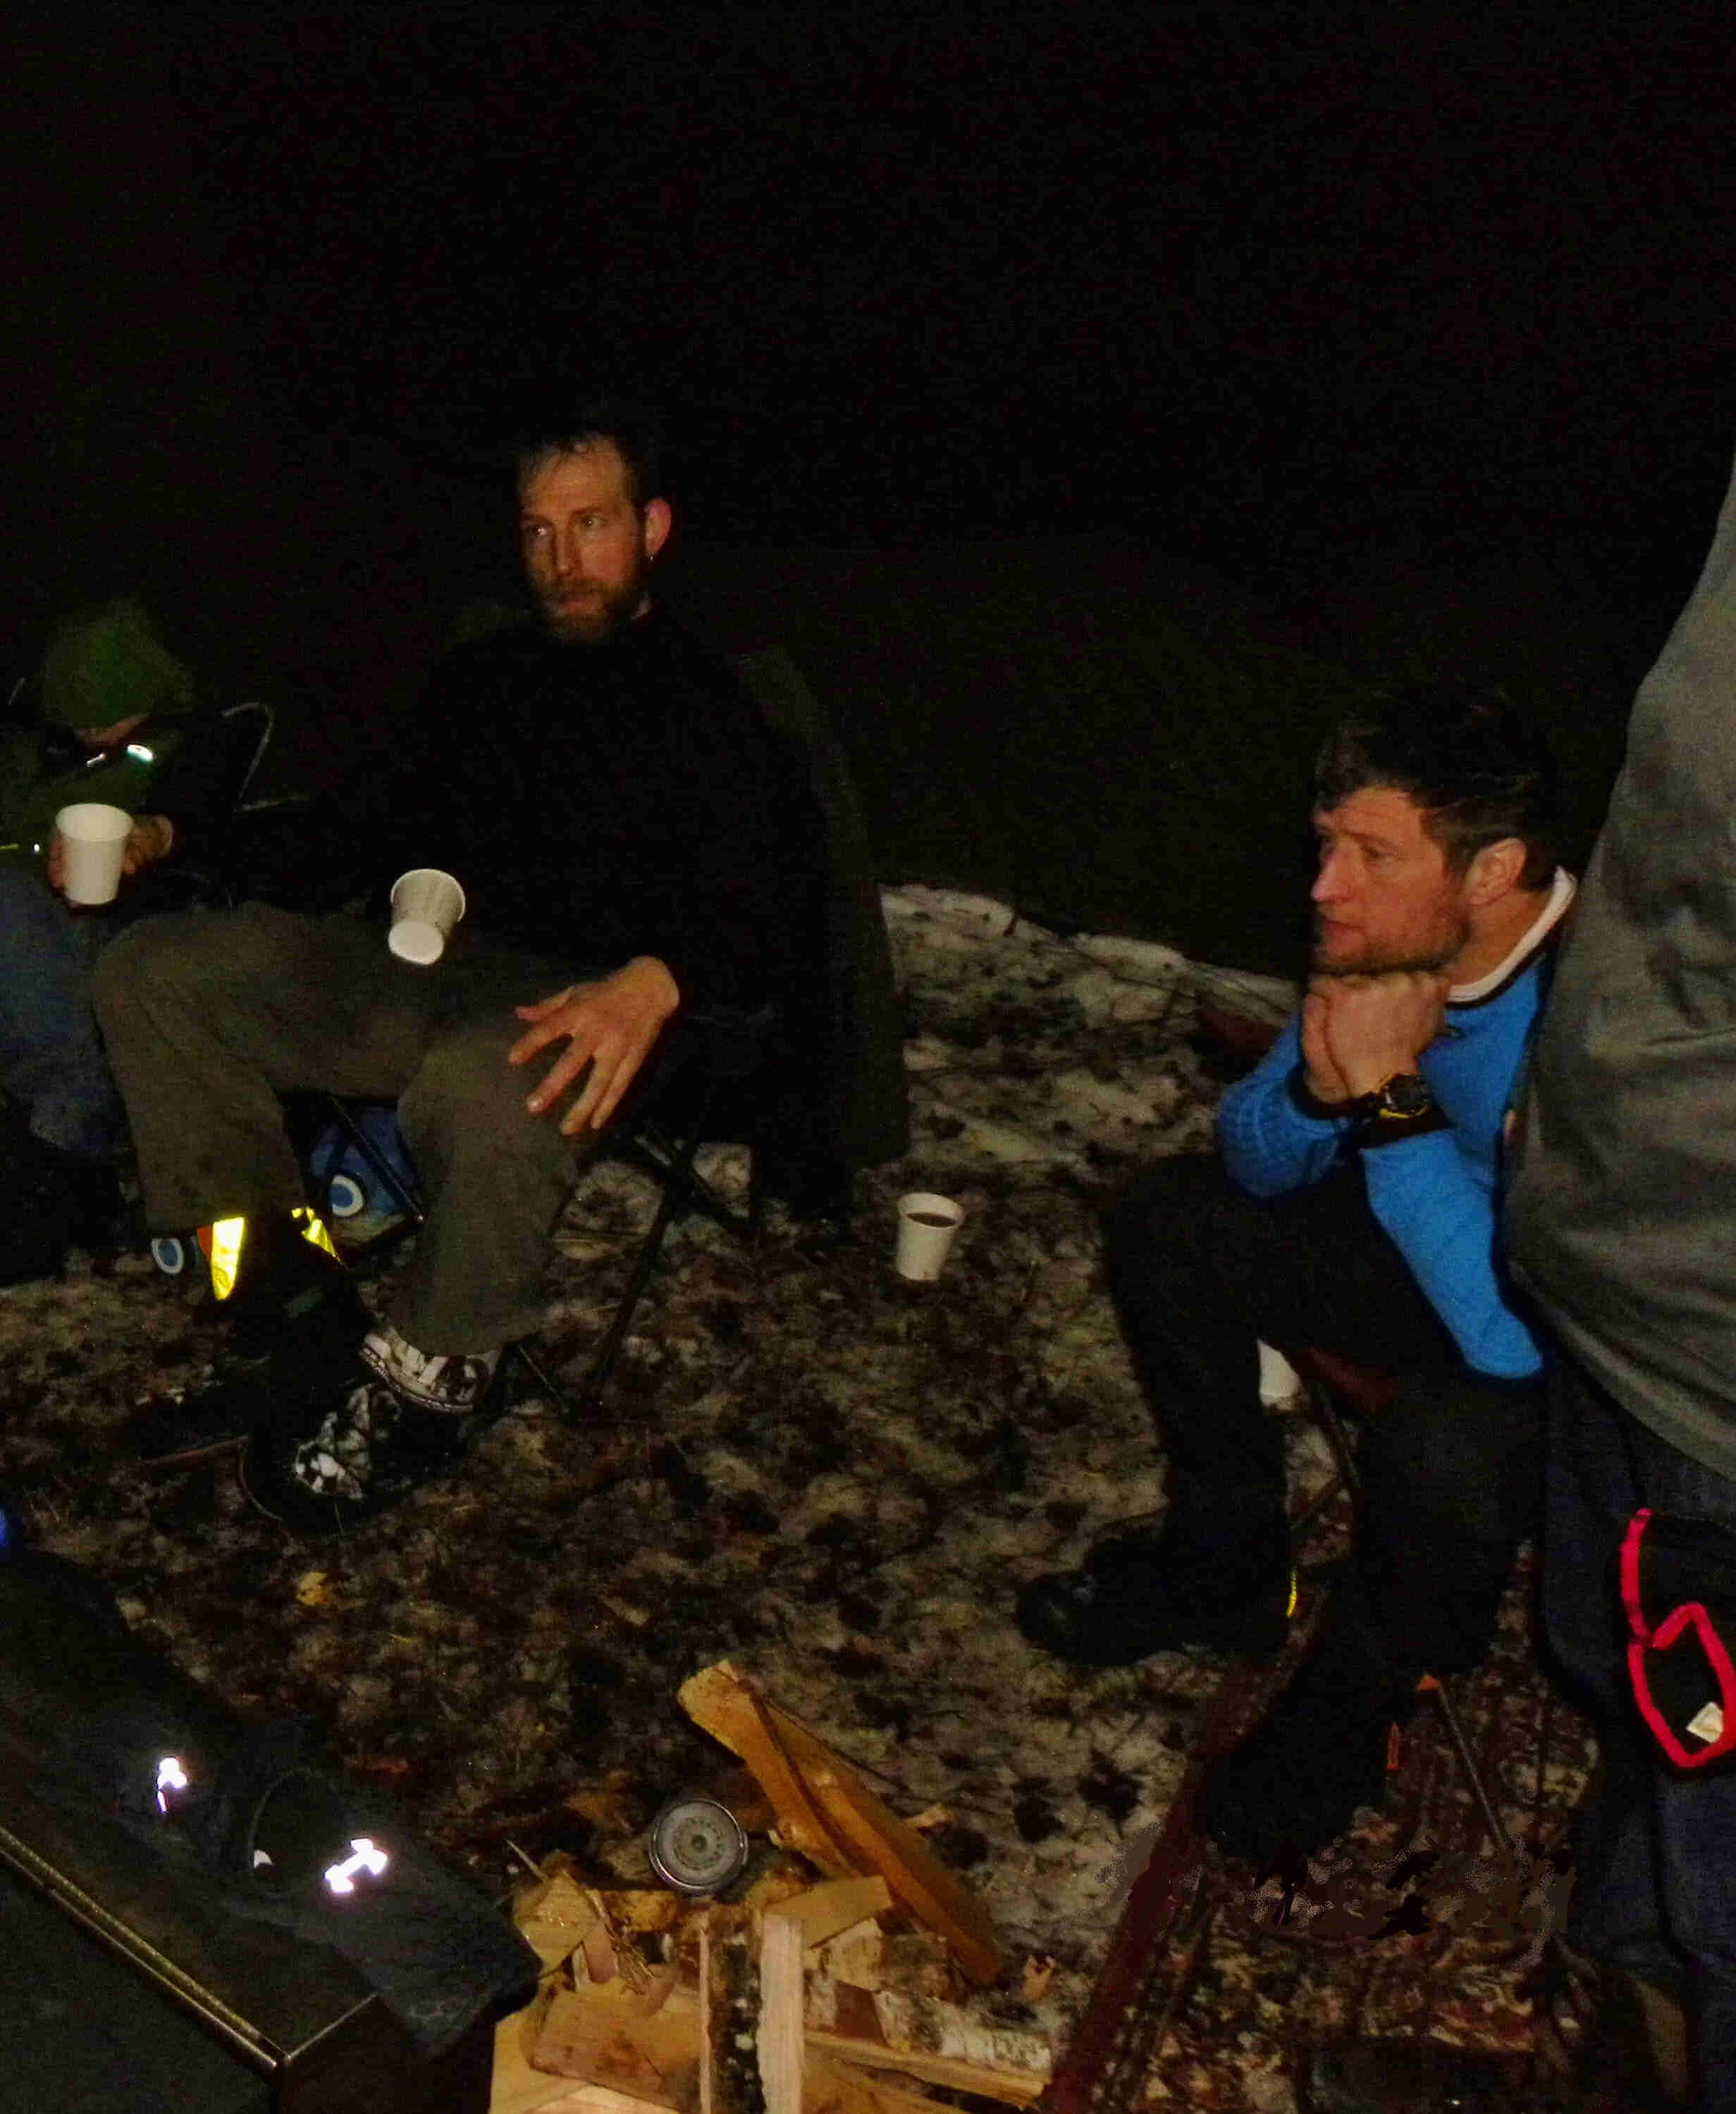 Front view of 2 people sitting in chairs, at a snowy campsite during the night 